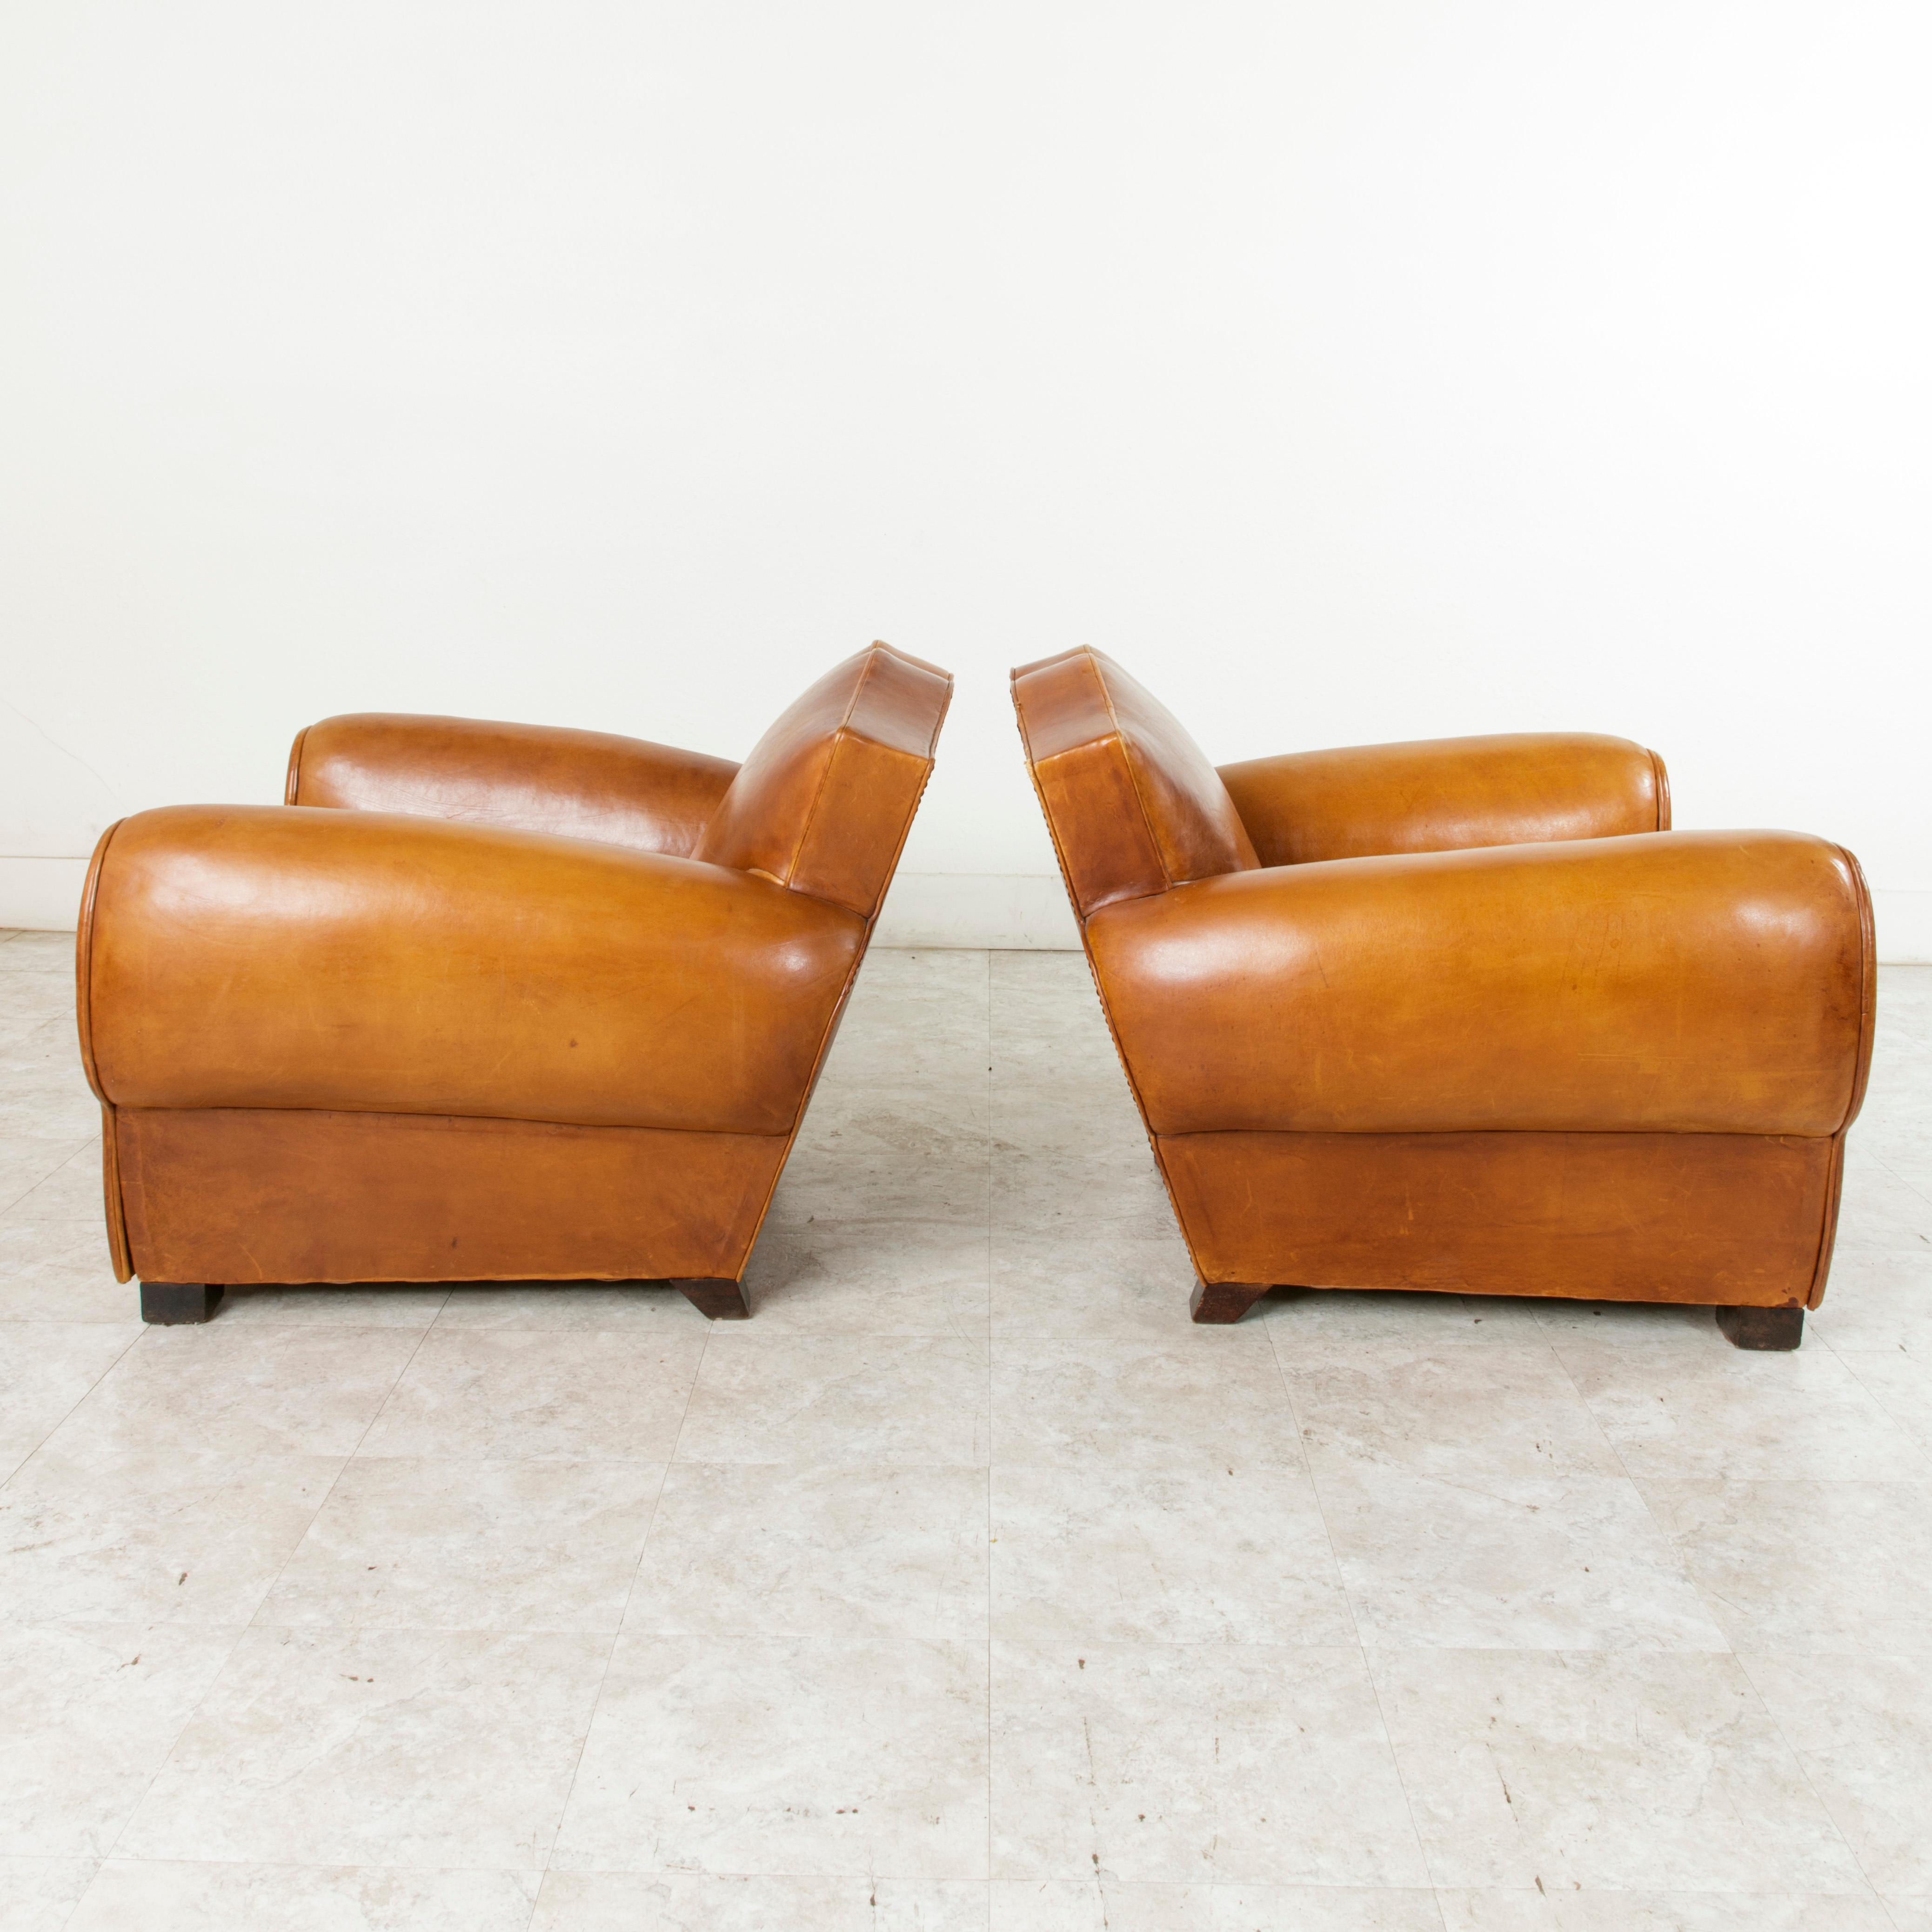 Mid-20th Century Pair of French Art Deco Leather Club Chairs, Moustache Back Club Chairs